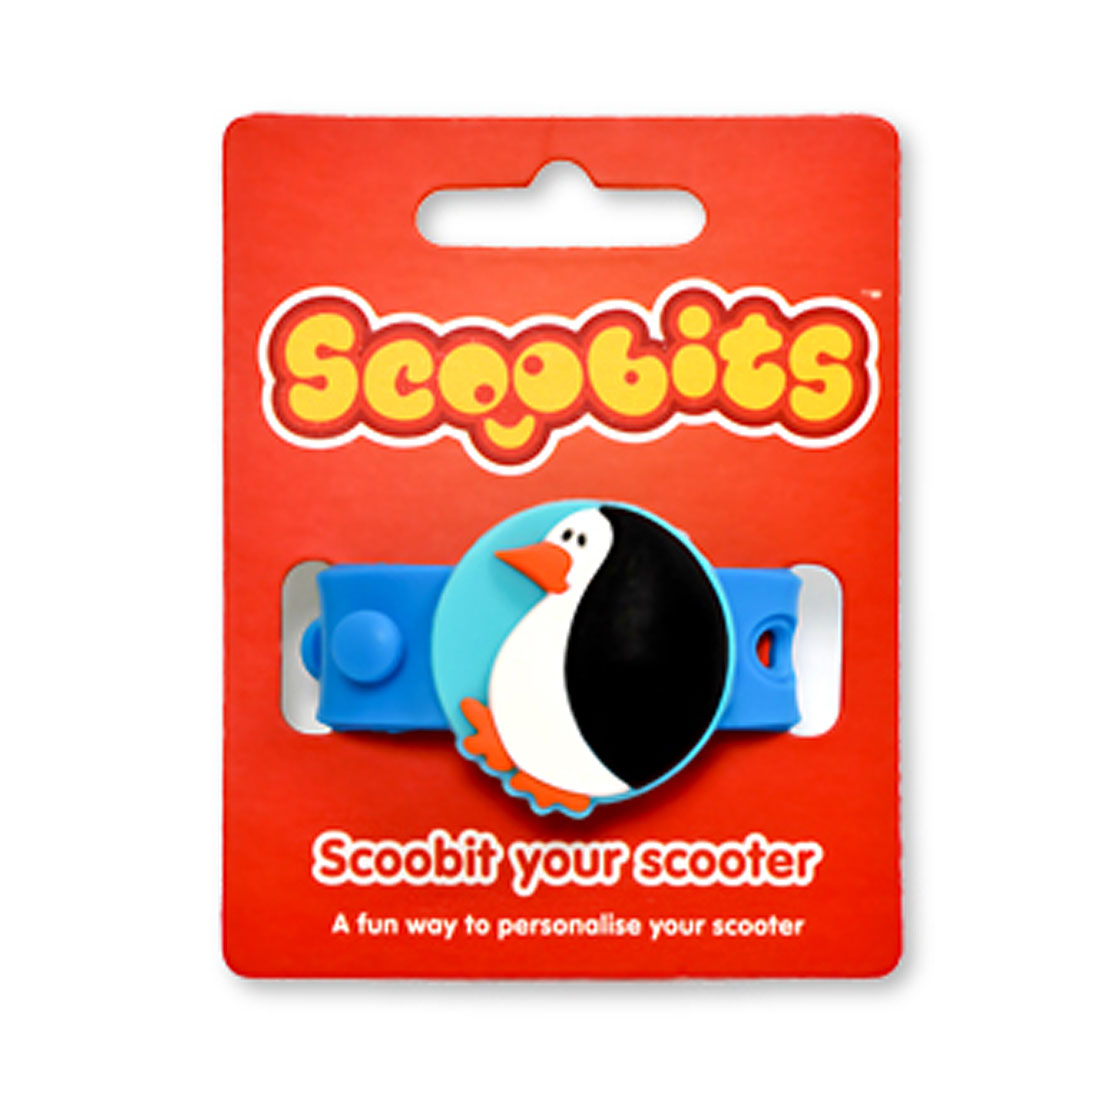 Scoobits Ernie the Penguin Scooter Accessories